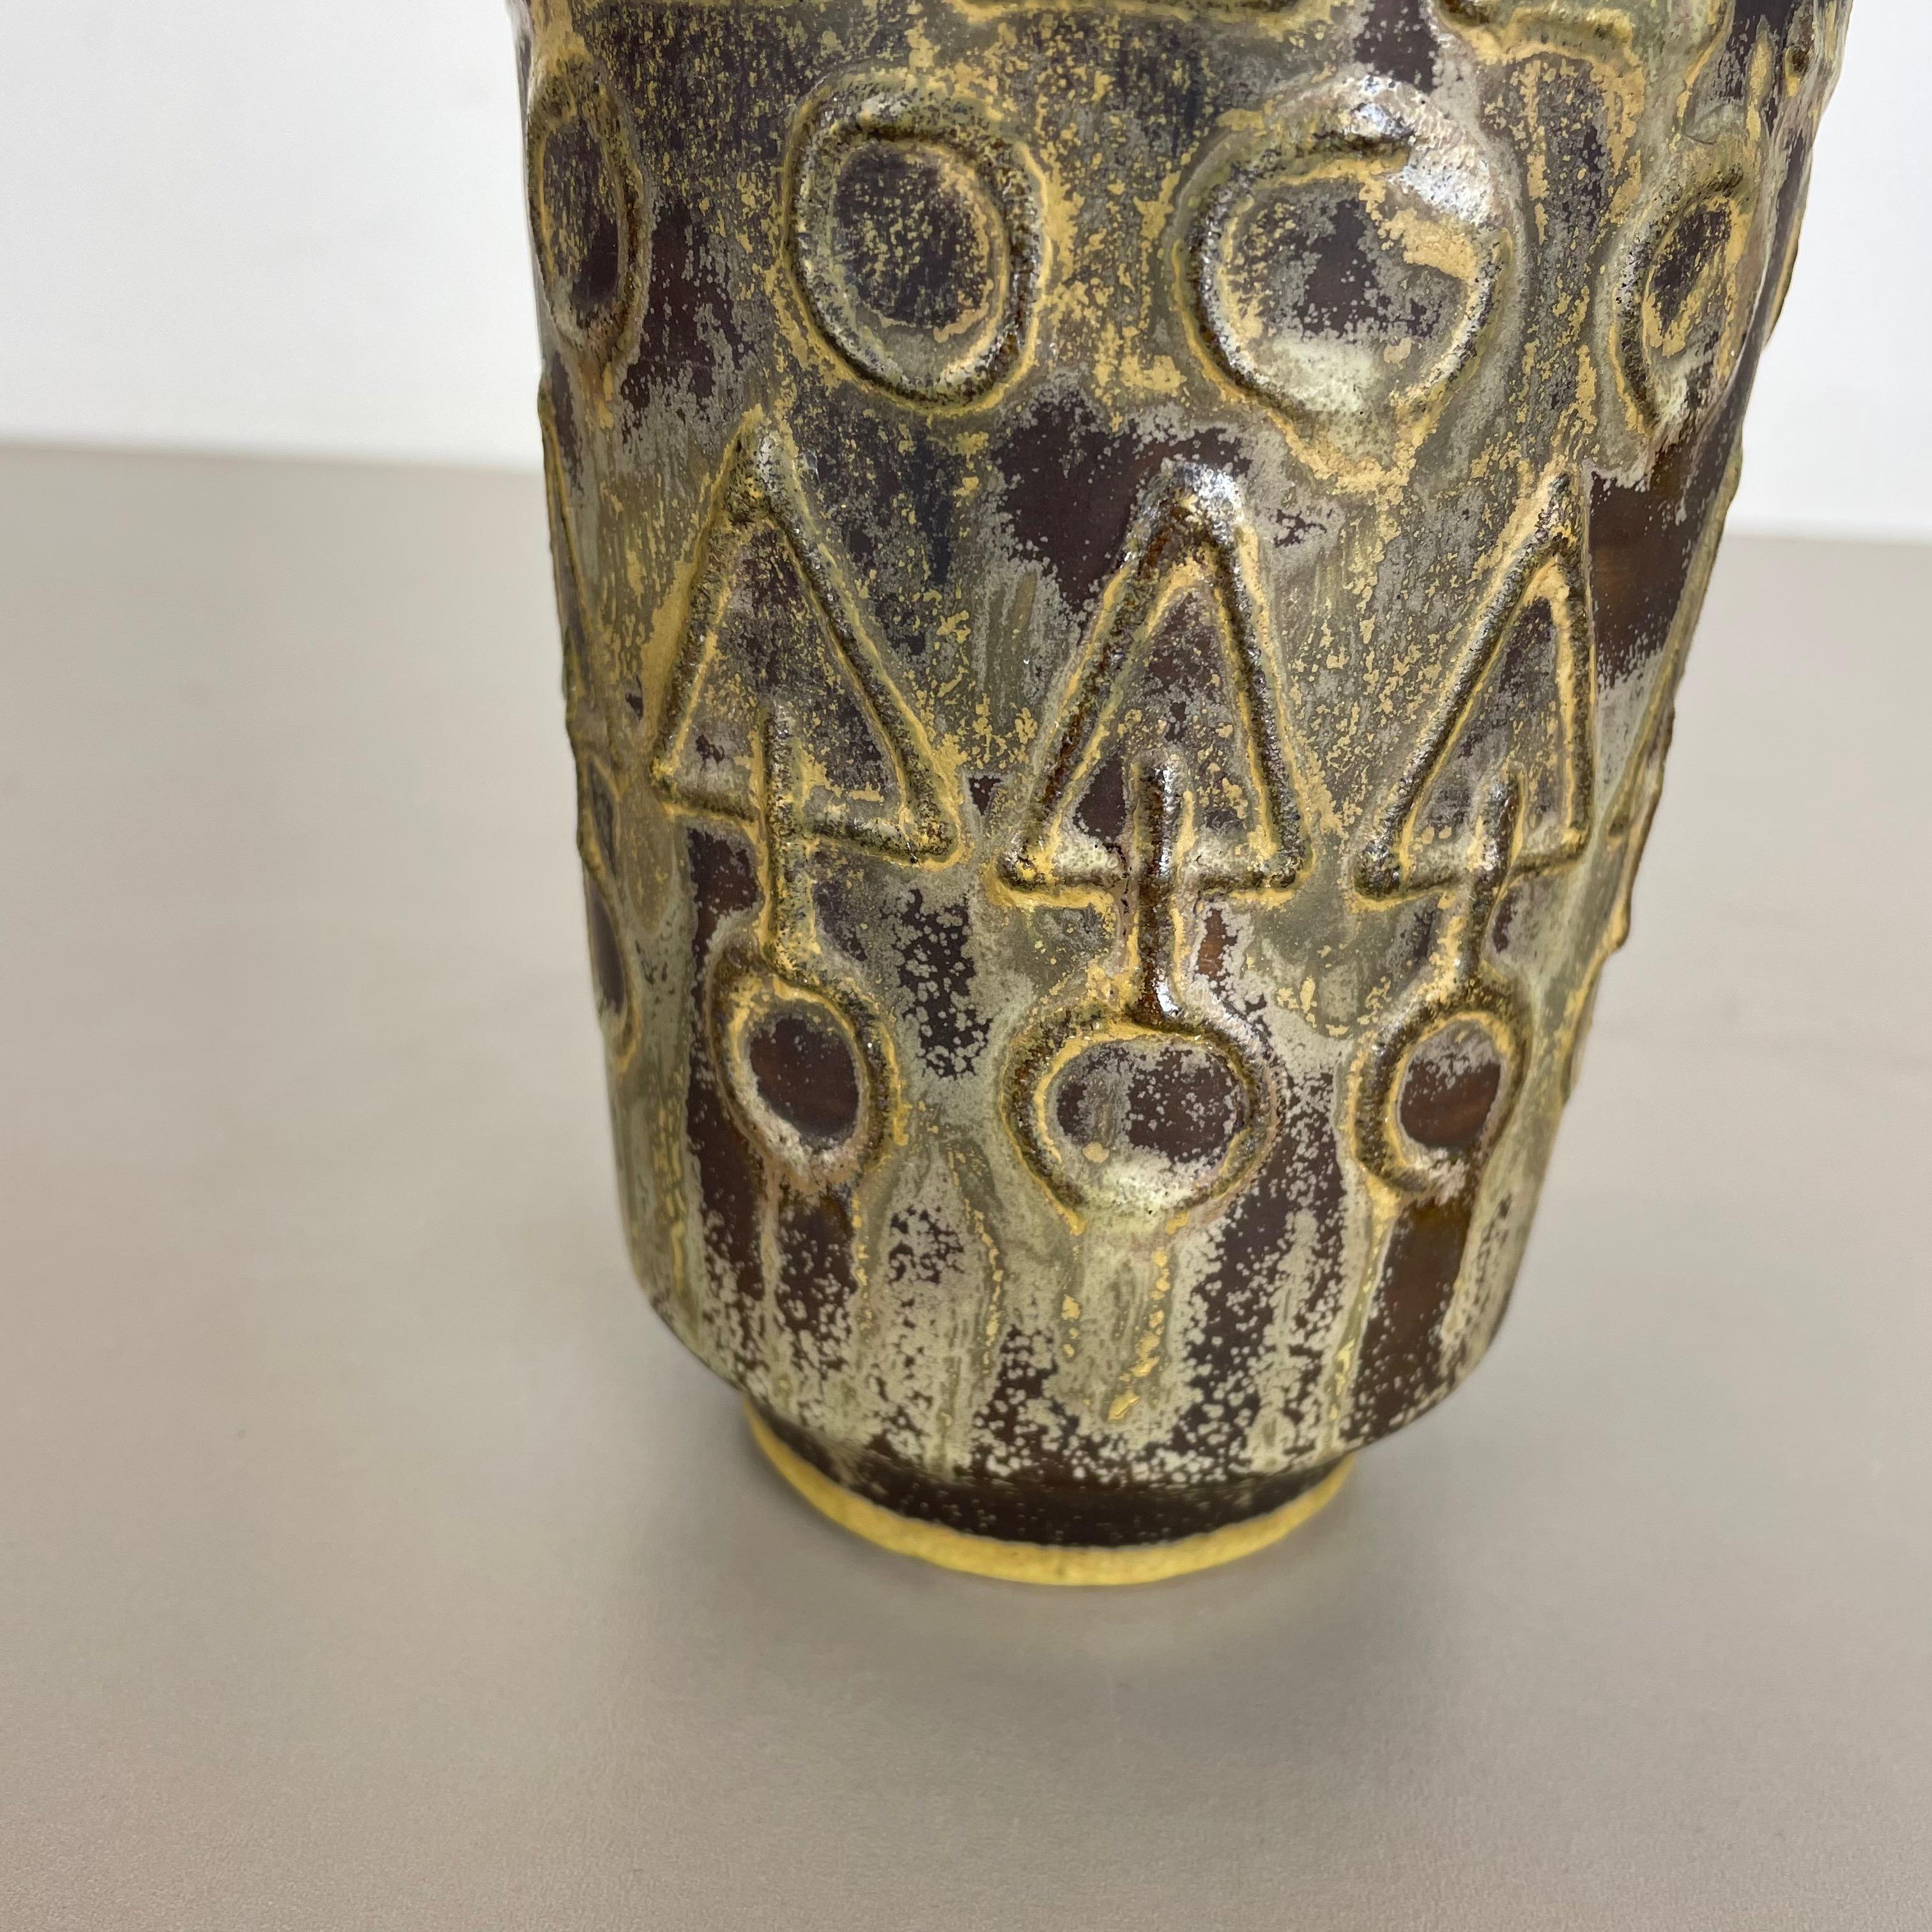 Vintage Abstract Ceramic Pottery Vase by Simon Peter Gerz, Germany, 1960s For Sale 2